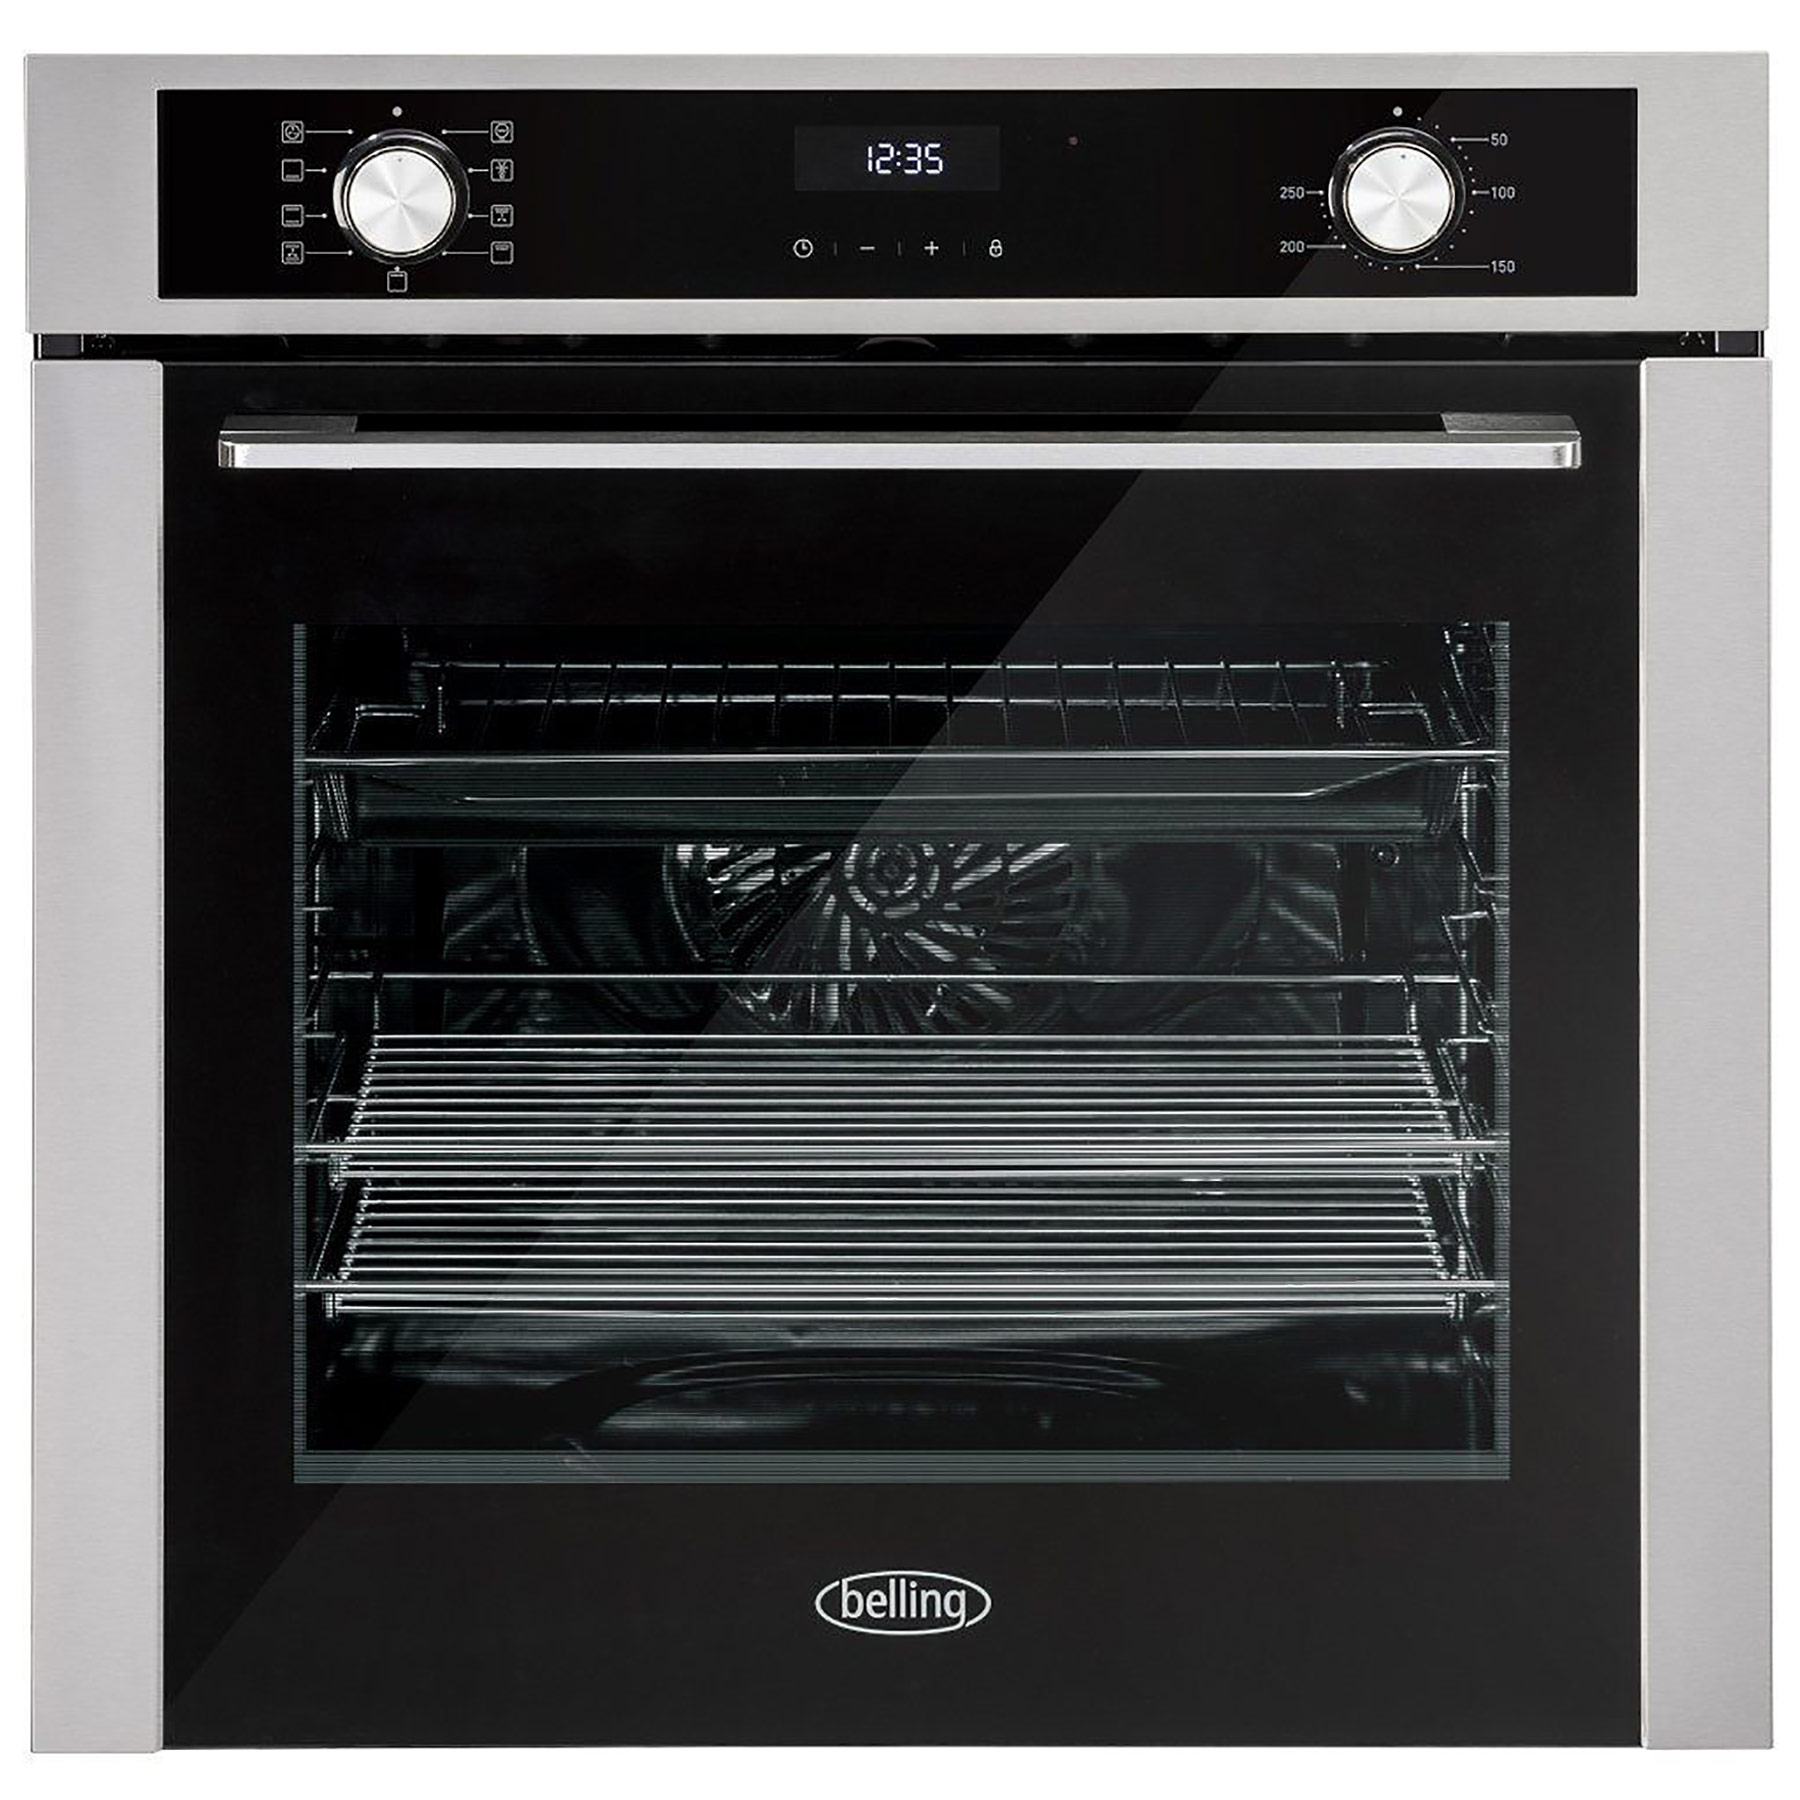 Belling 444411627 Built In Electric Single Oven in St Steel 72L A Rate